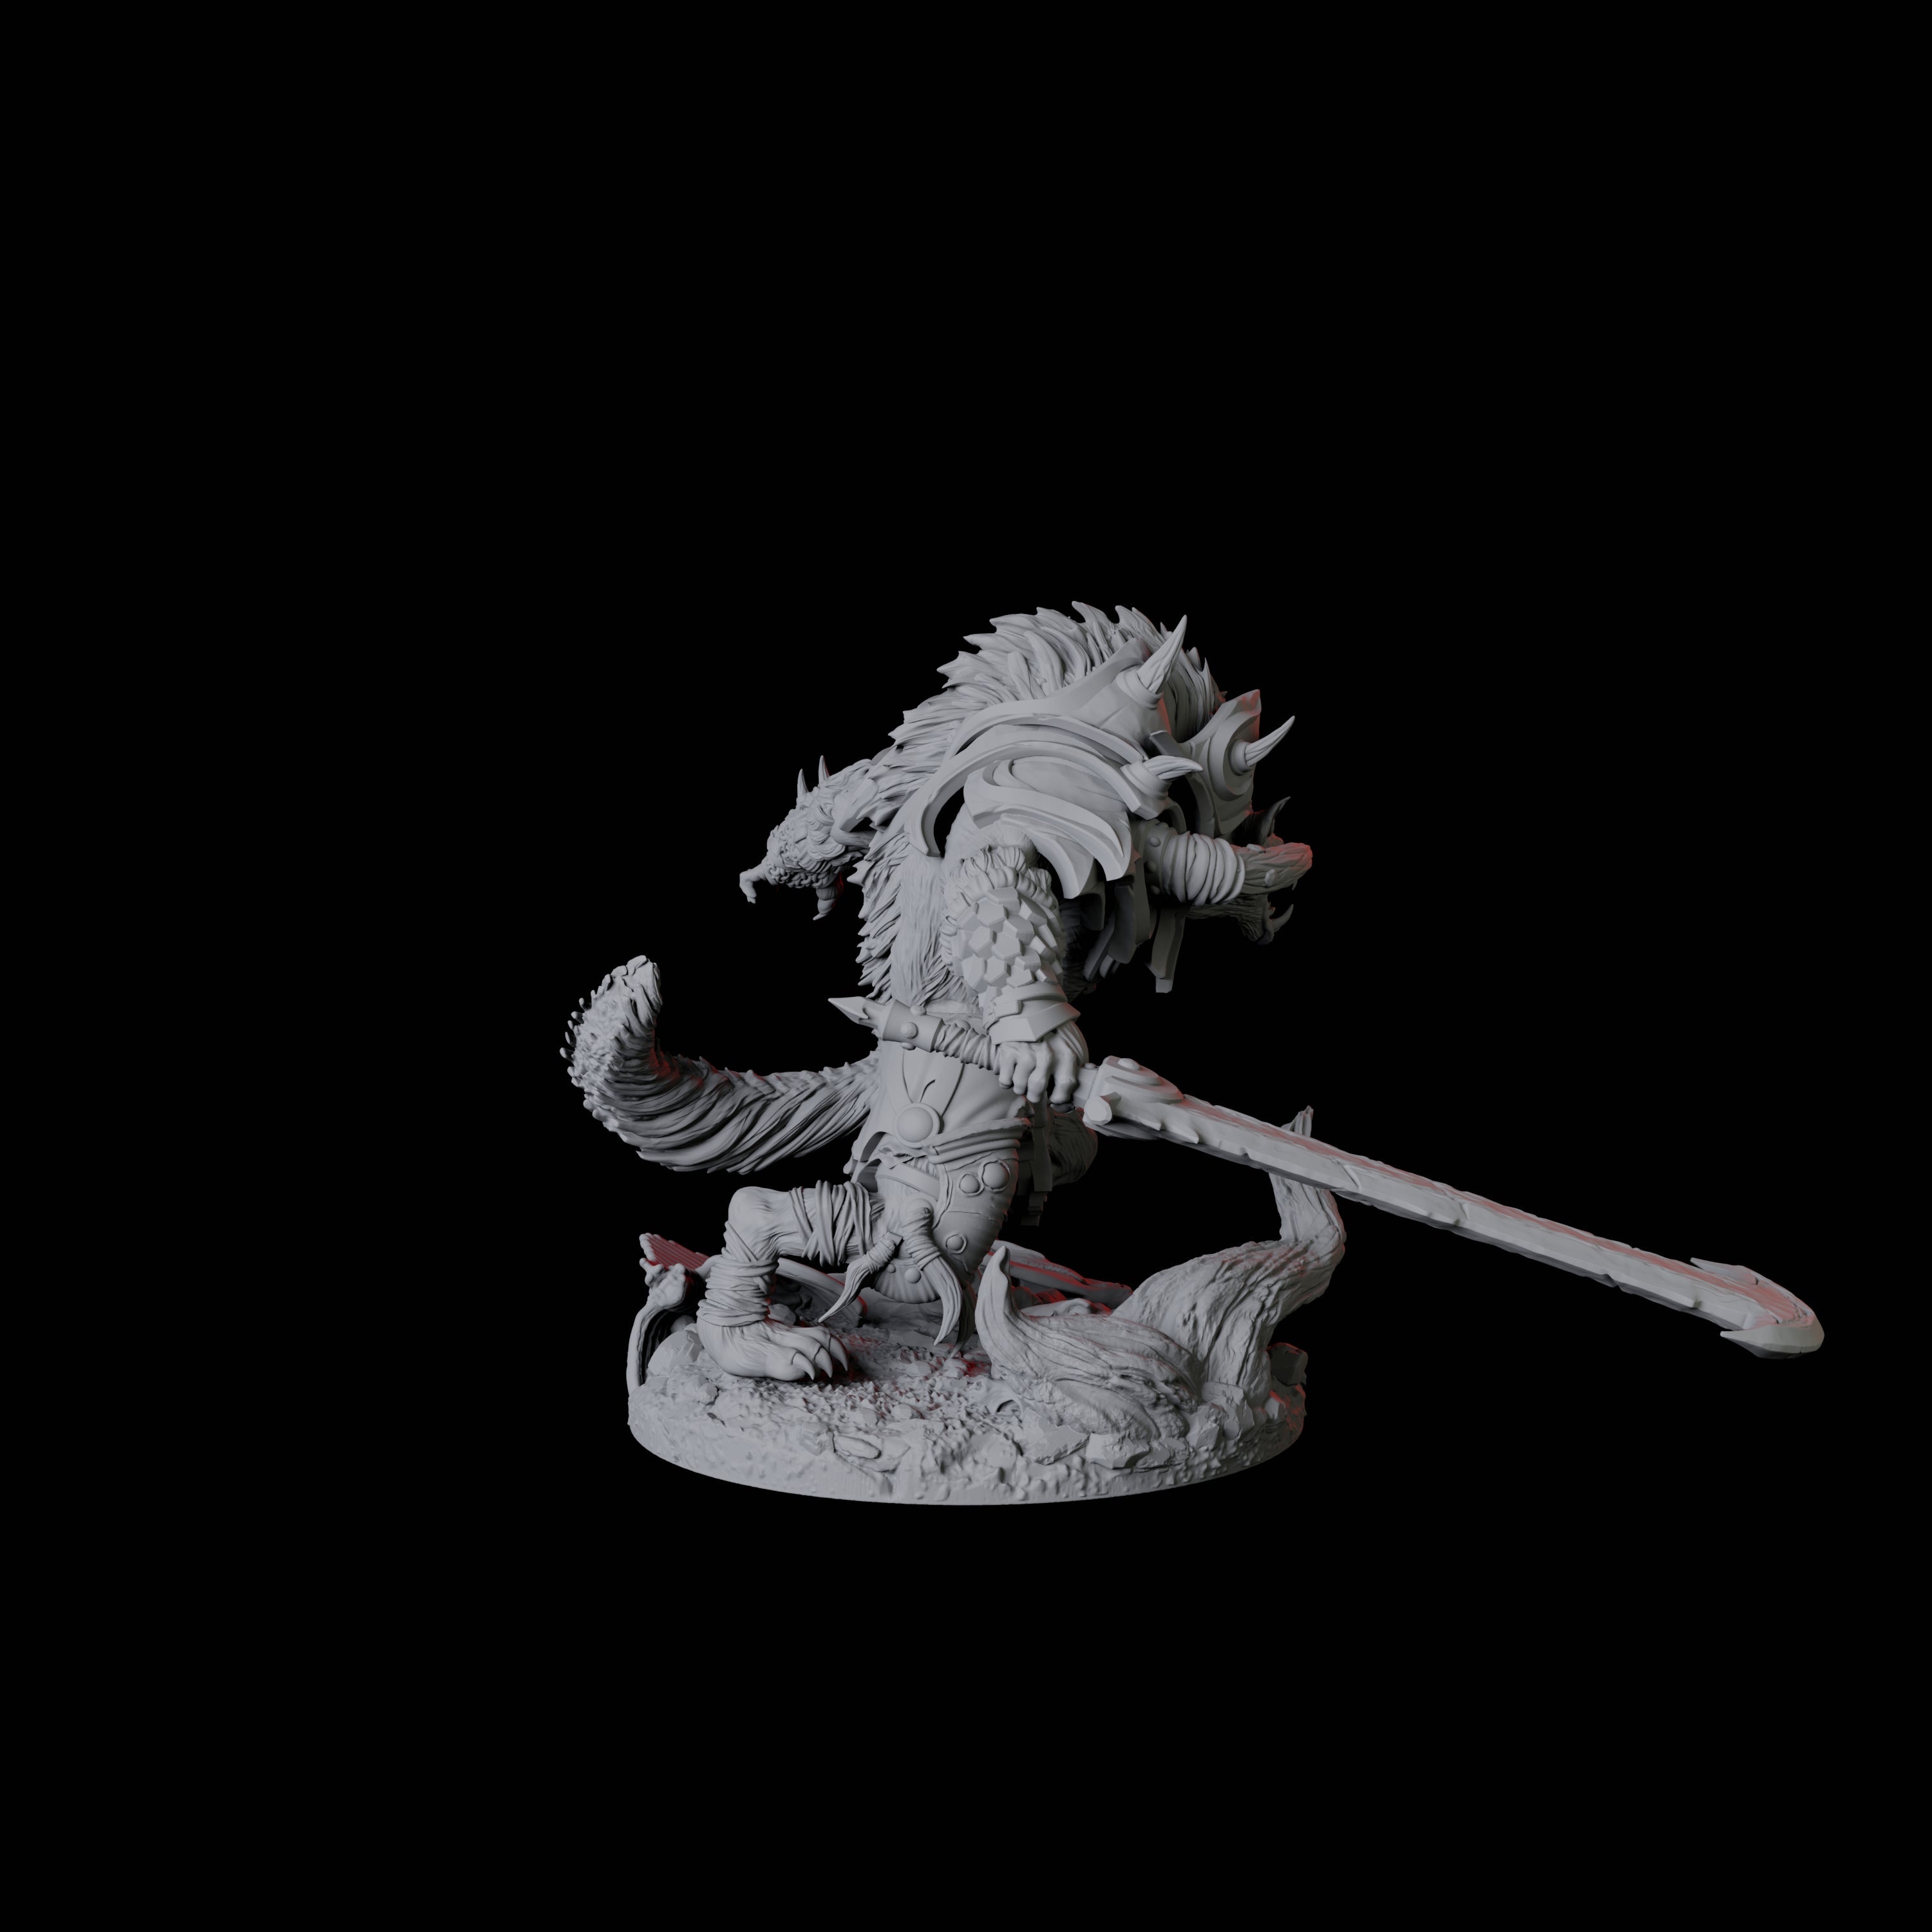 Five Bruising Gnoll Brutes Miniature for Dungeons and Dragons, Pathfinder or other TTRPGs